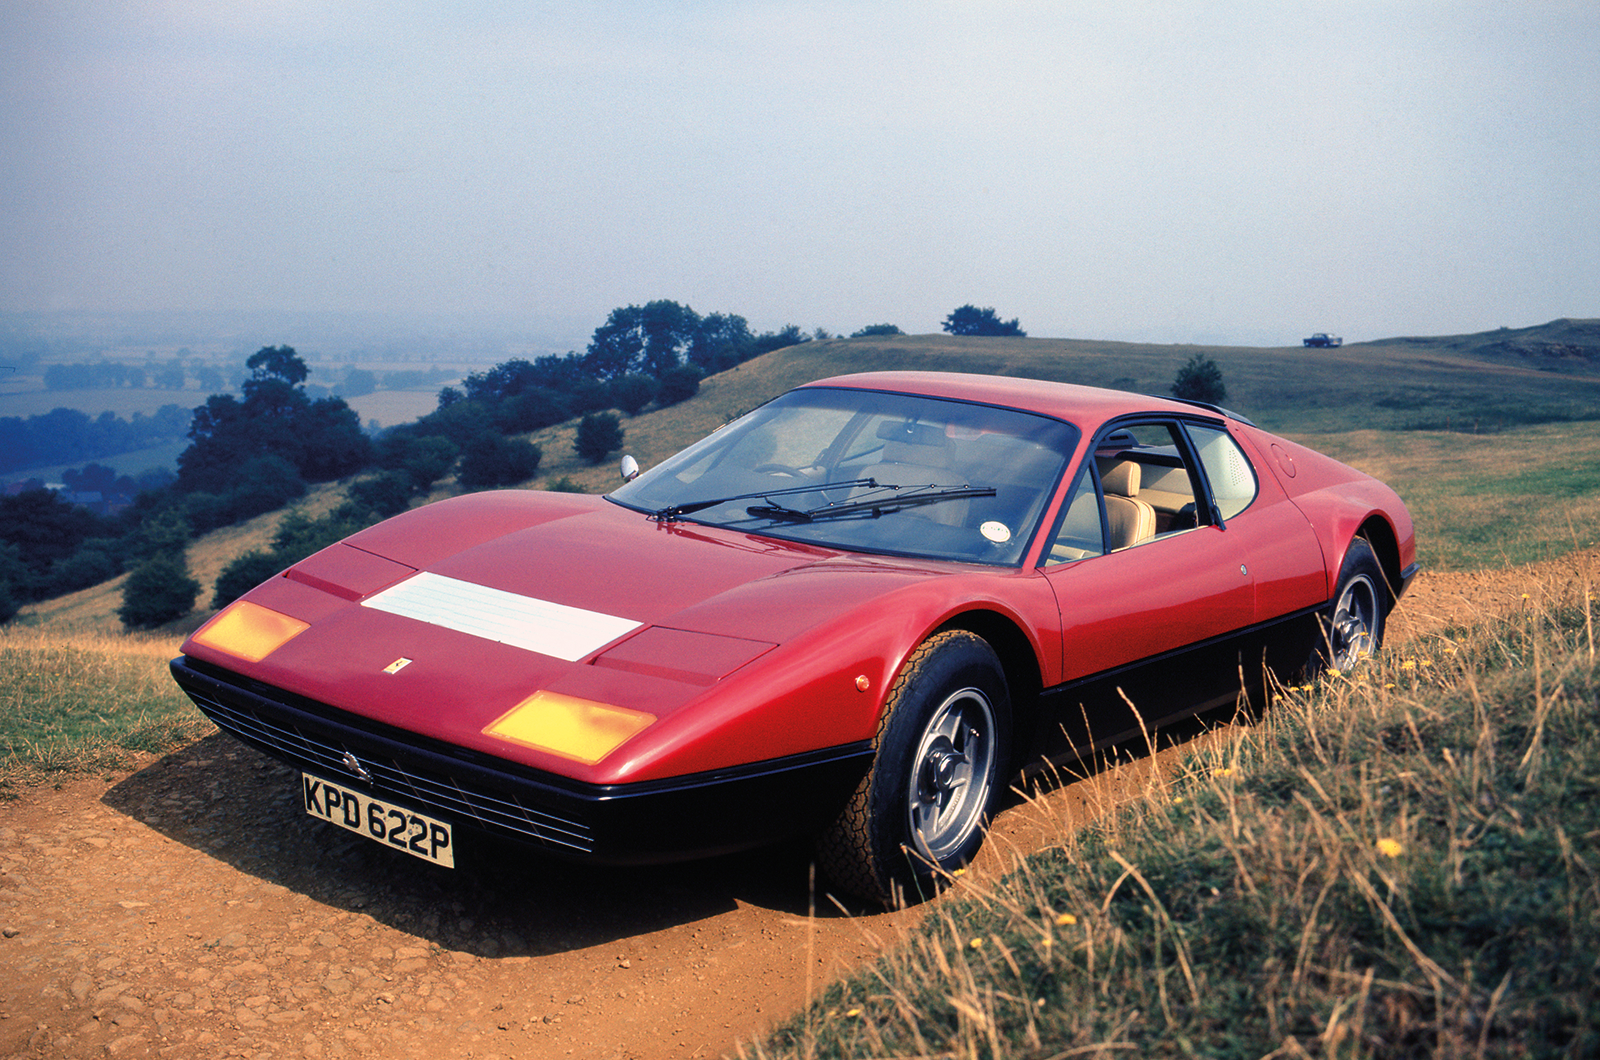 Lamborghini Countach buyer's guide: what to pay and what to look for